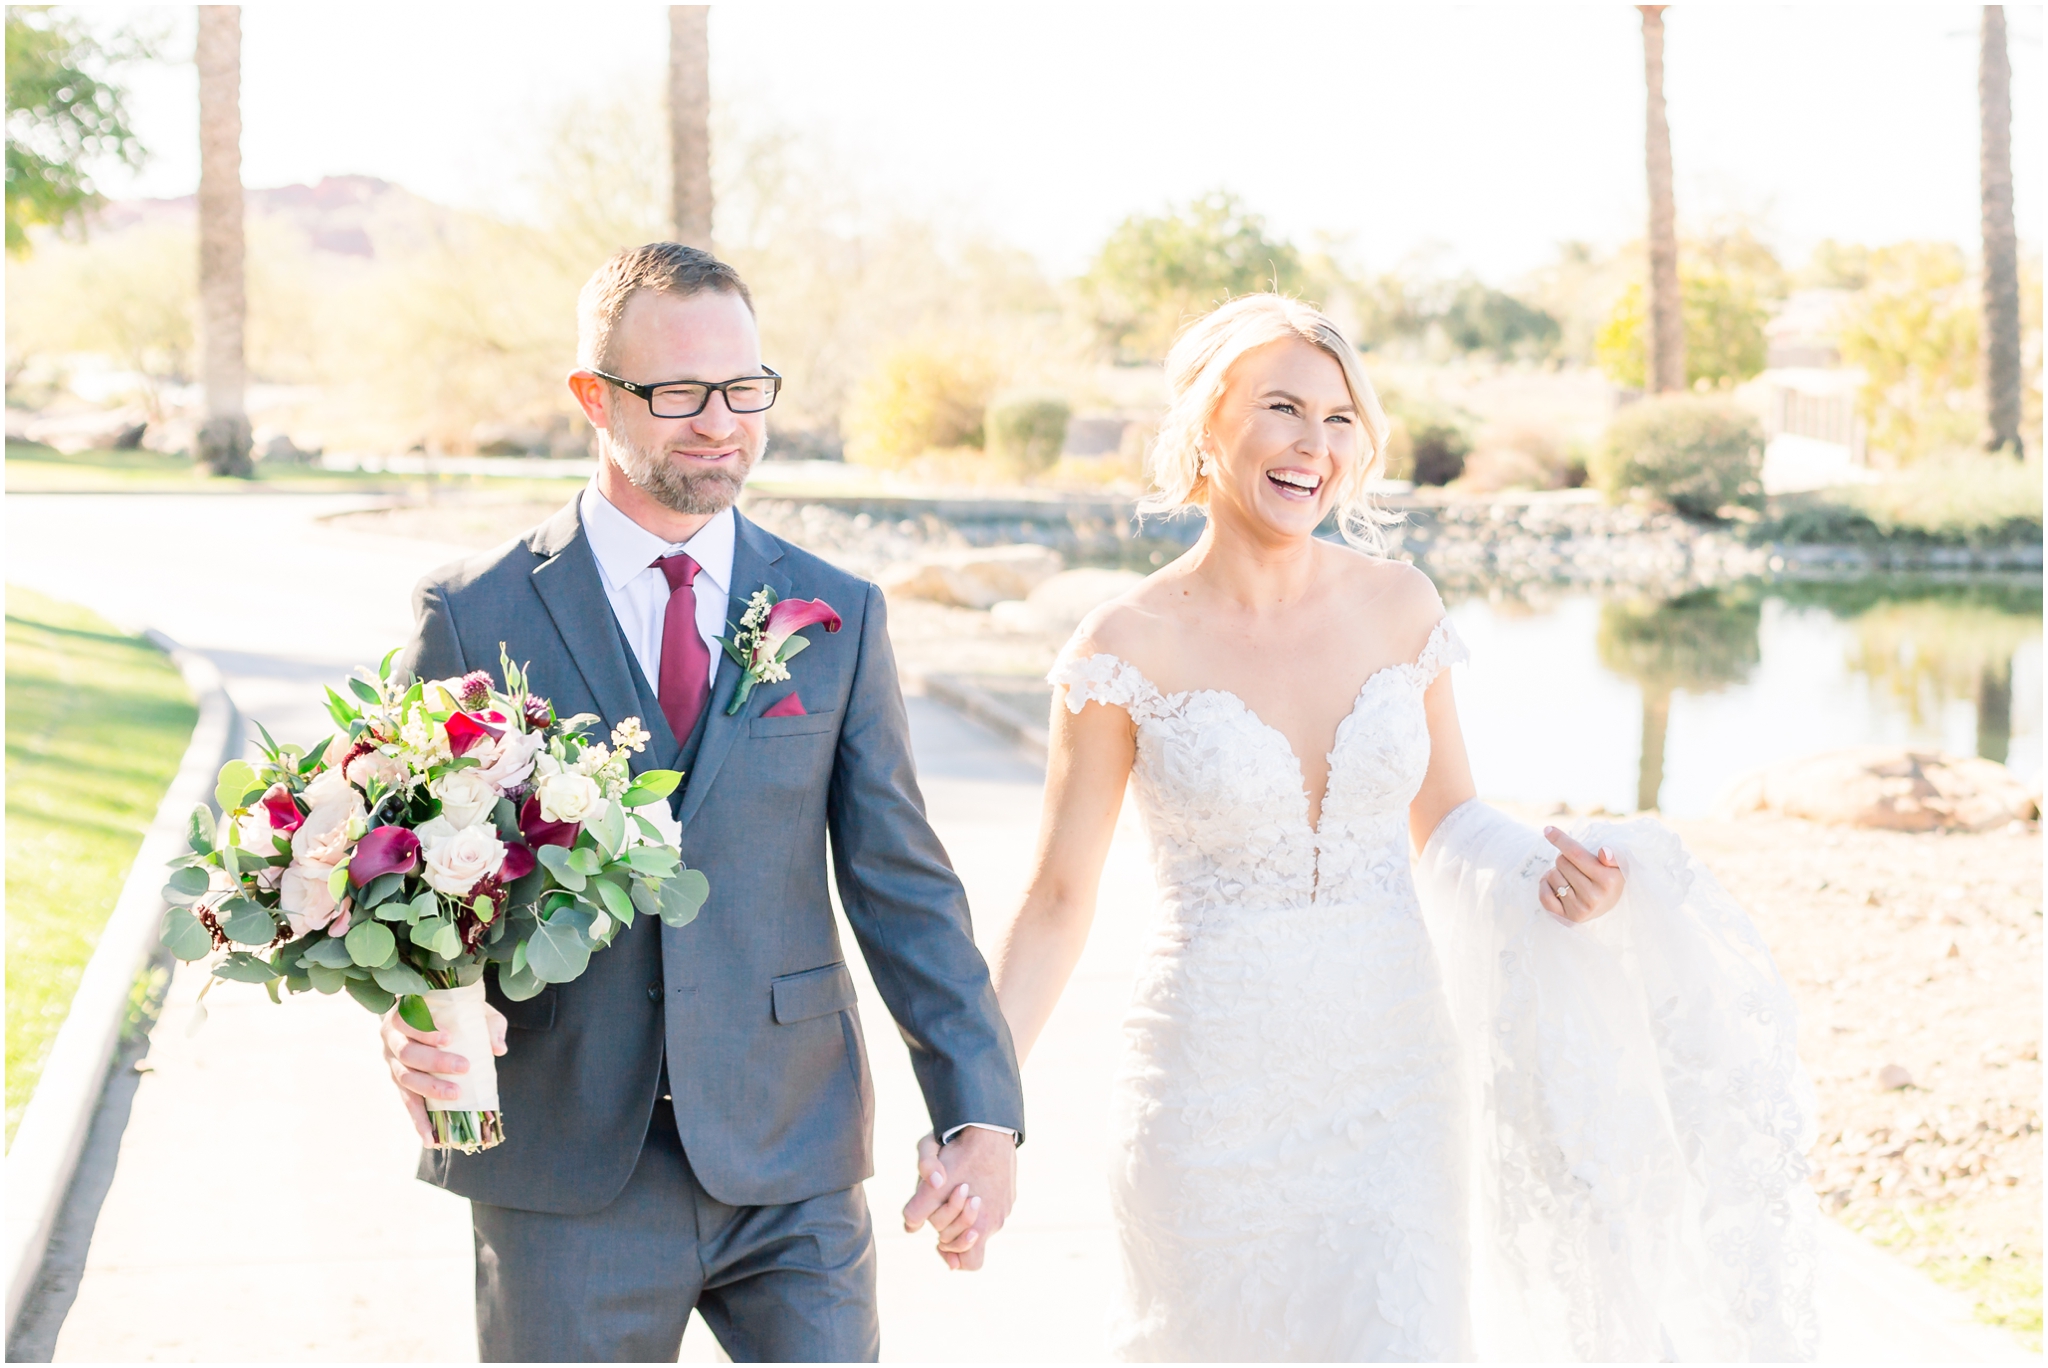 Kiva Club Wedding | Burgundy and Gold Wedding | Wedding Party | Sunset Portraits | Outdoor Ceremony | Outdoor Reception | Burgundy Bridesmaids Dresses | Grey Suits